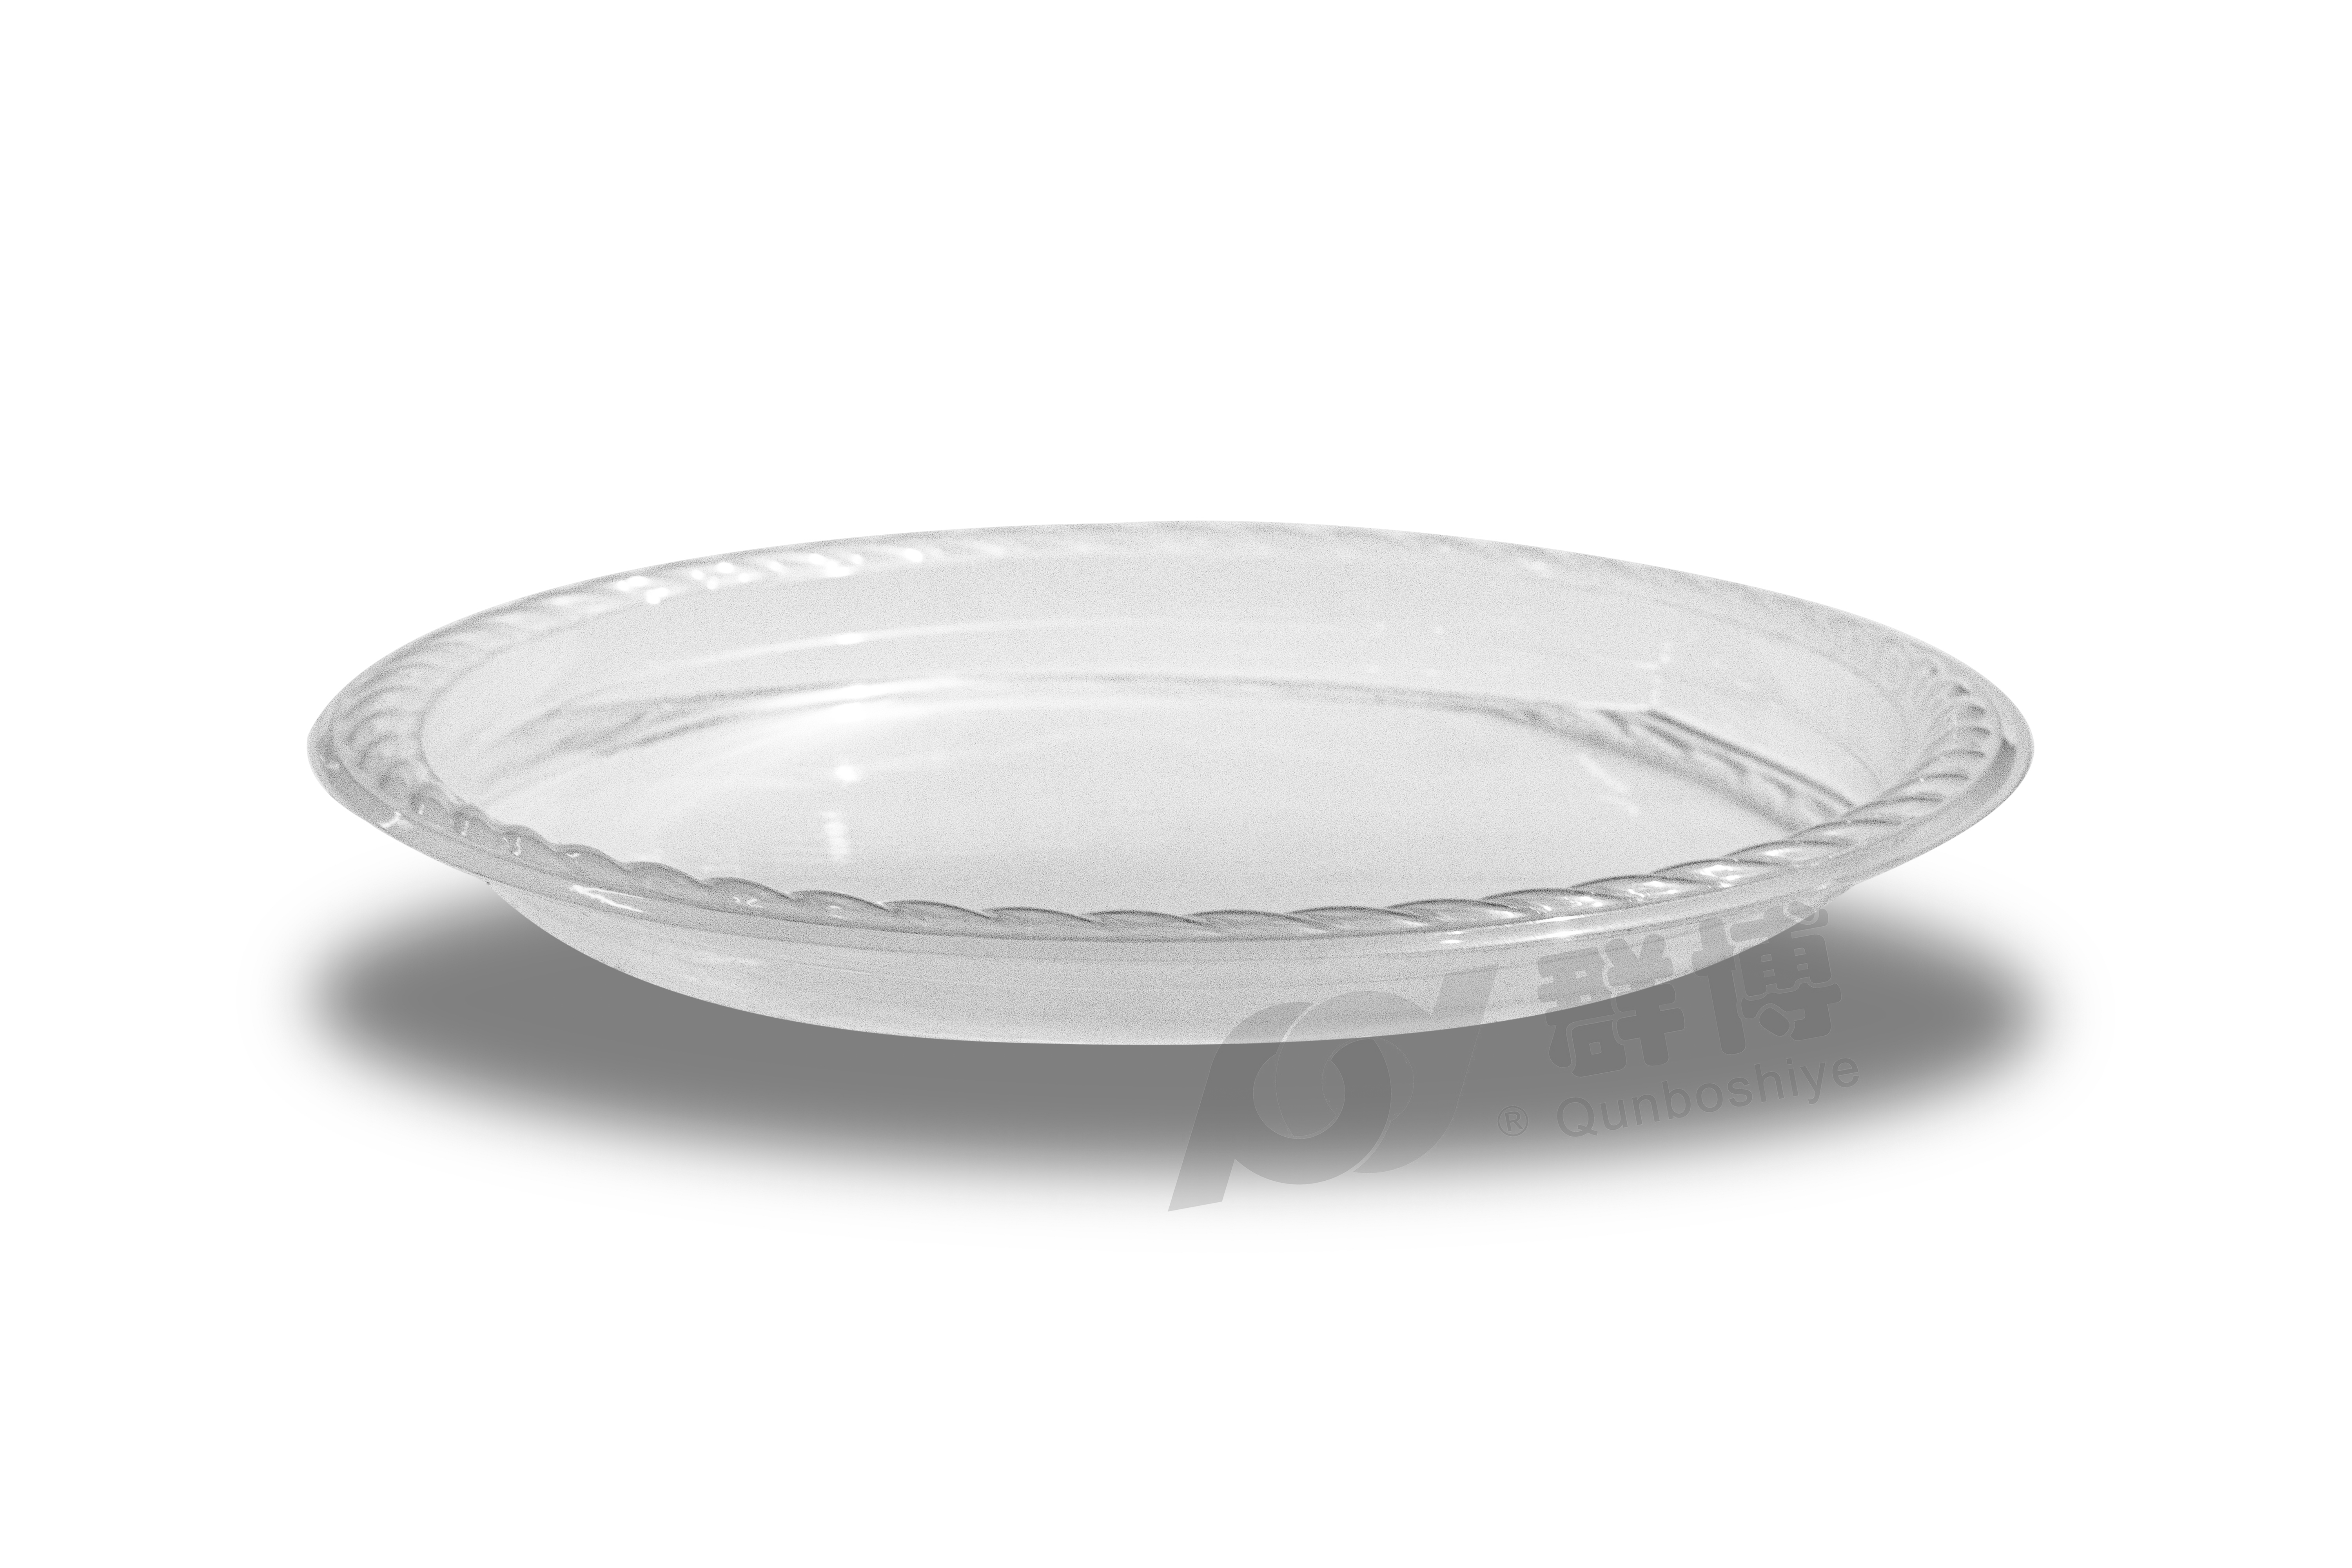 American-style 10-inch Scalloped Edge Round Plate